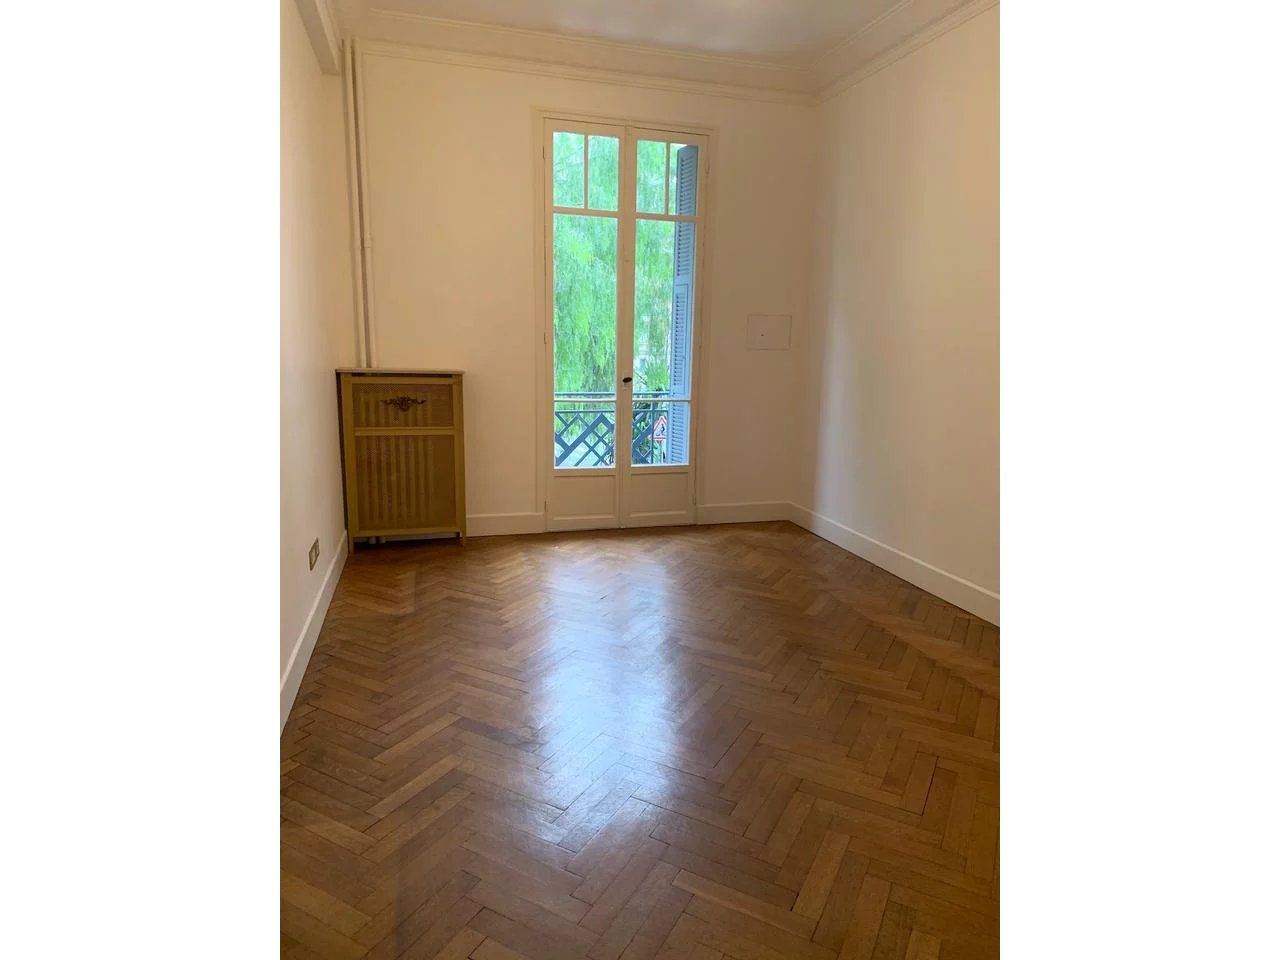 Appartement  3 Rooms 87.58m2  for sale   499 510 €